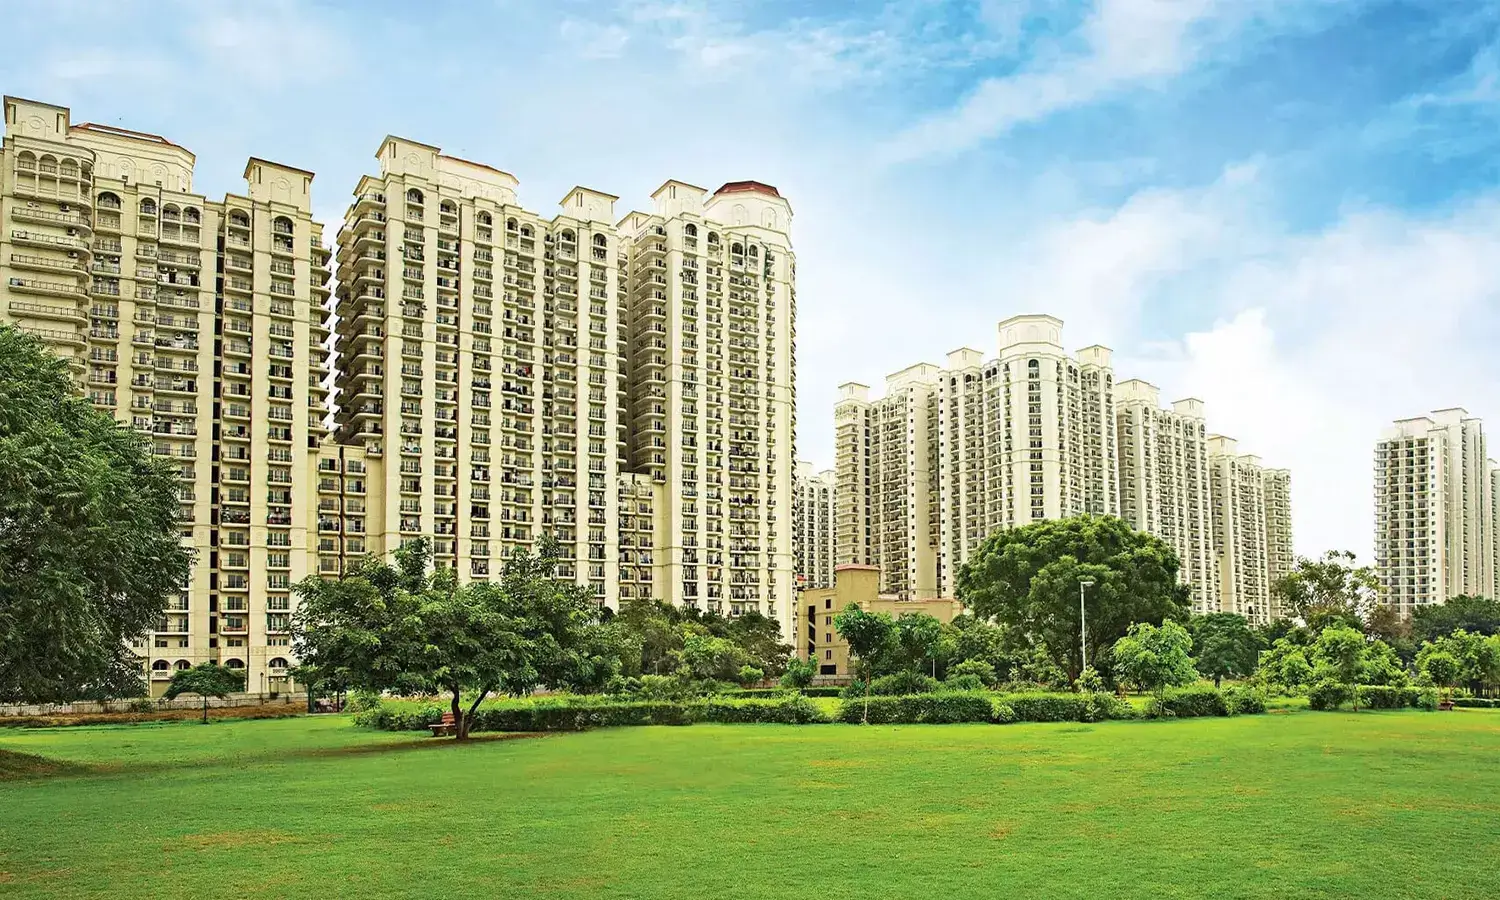 dlf Residential Projects gurgaon